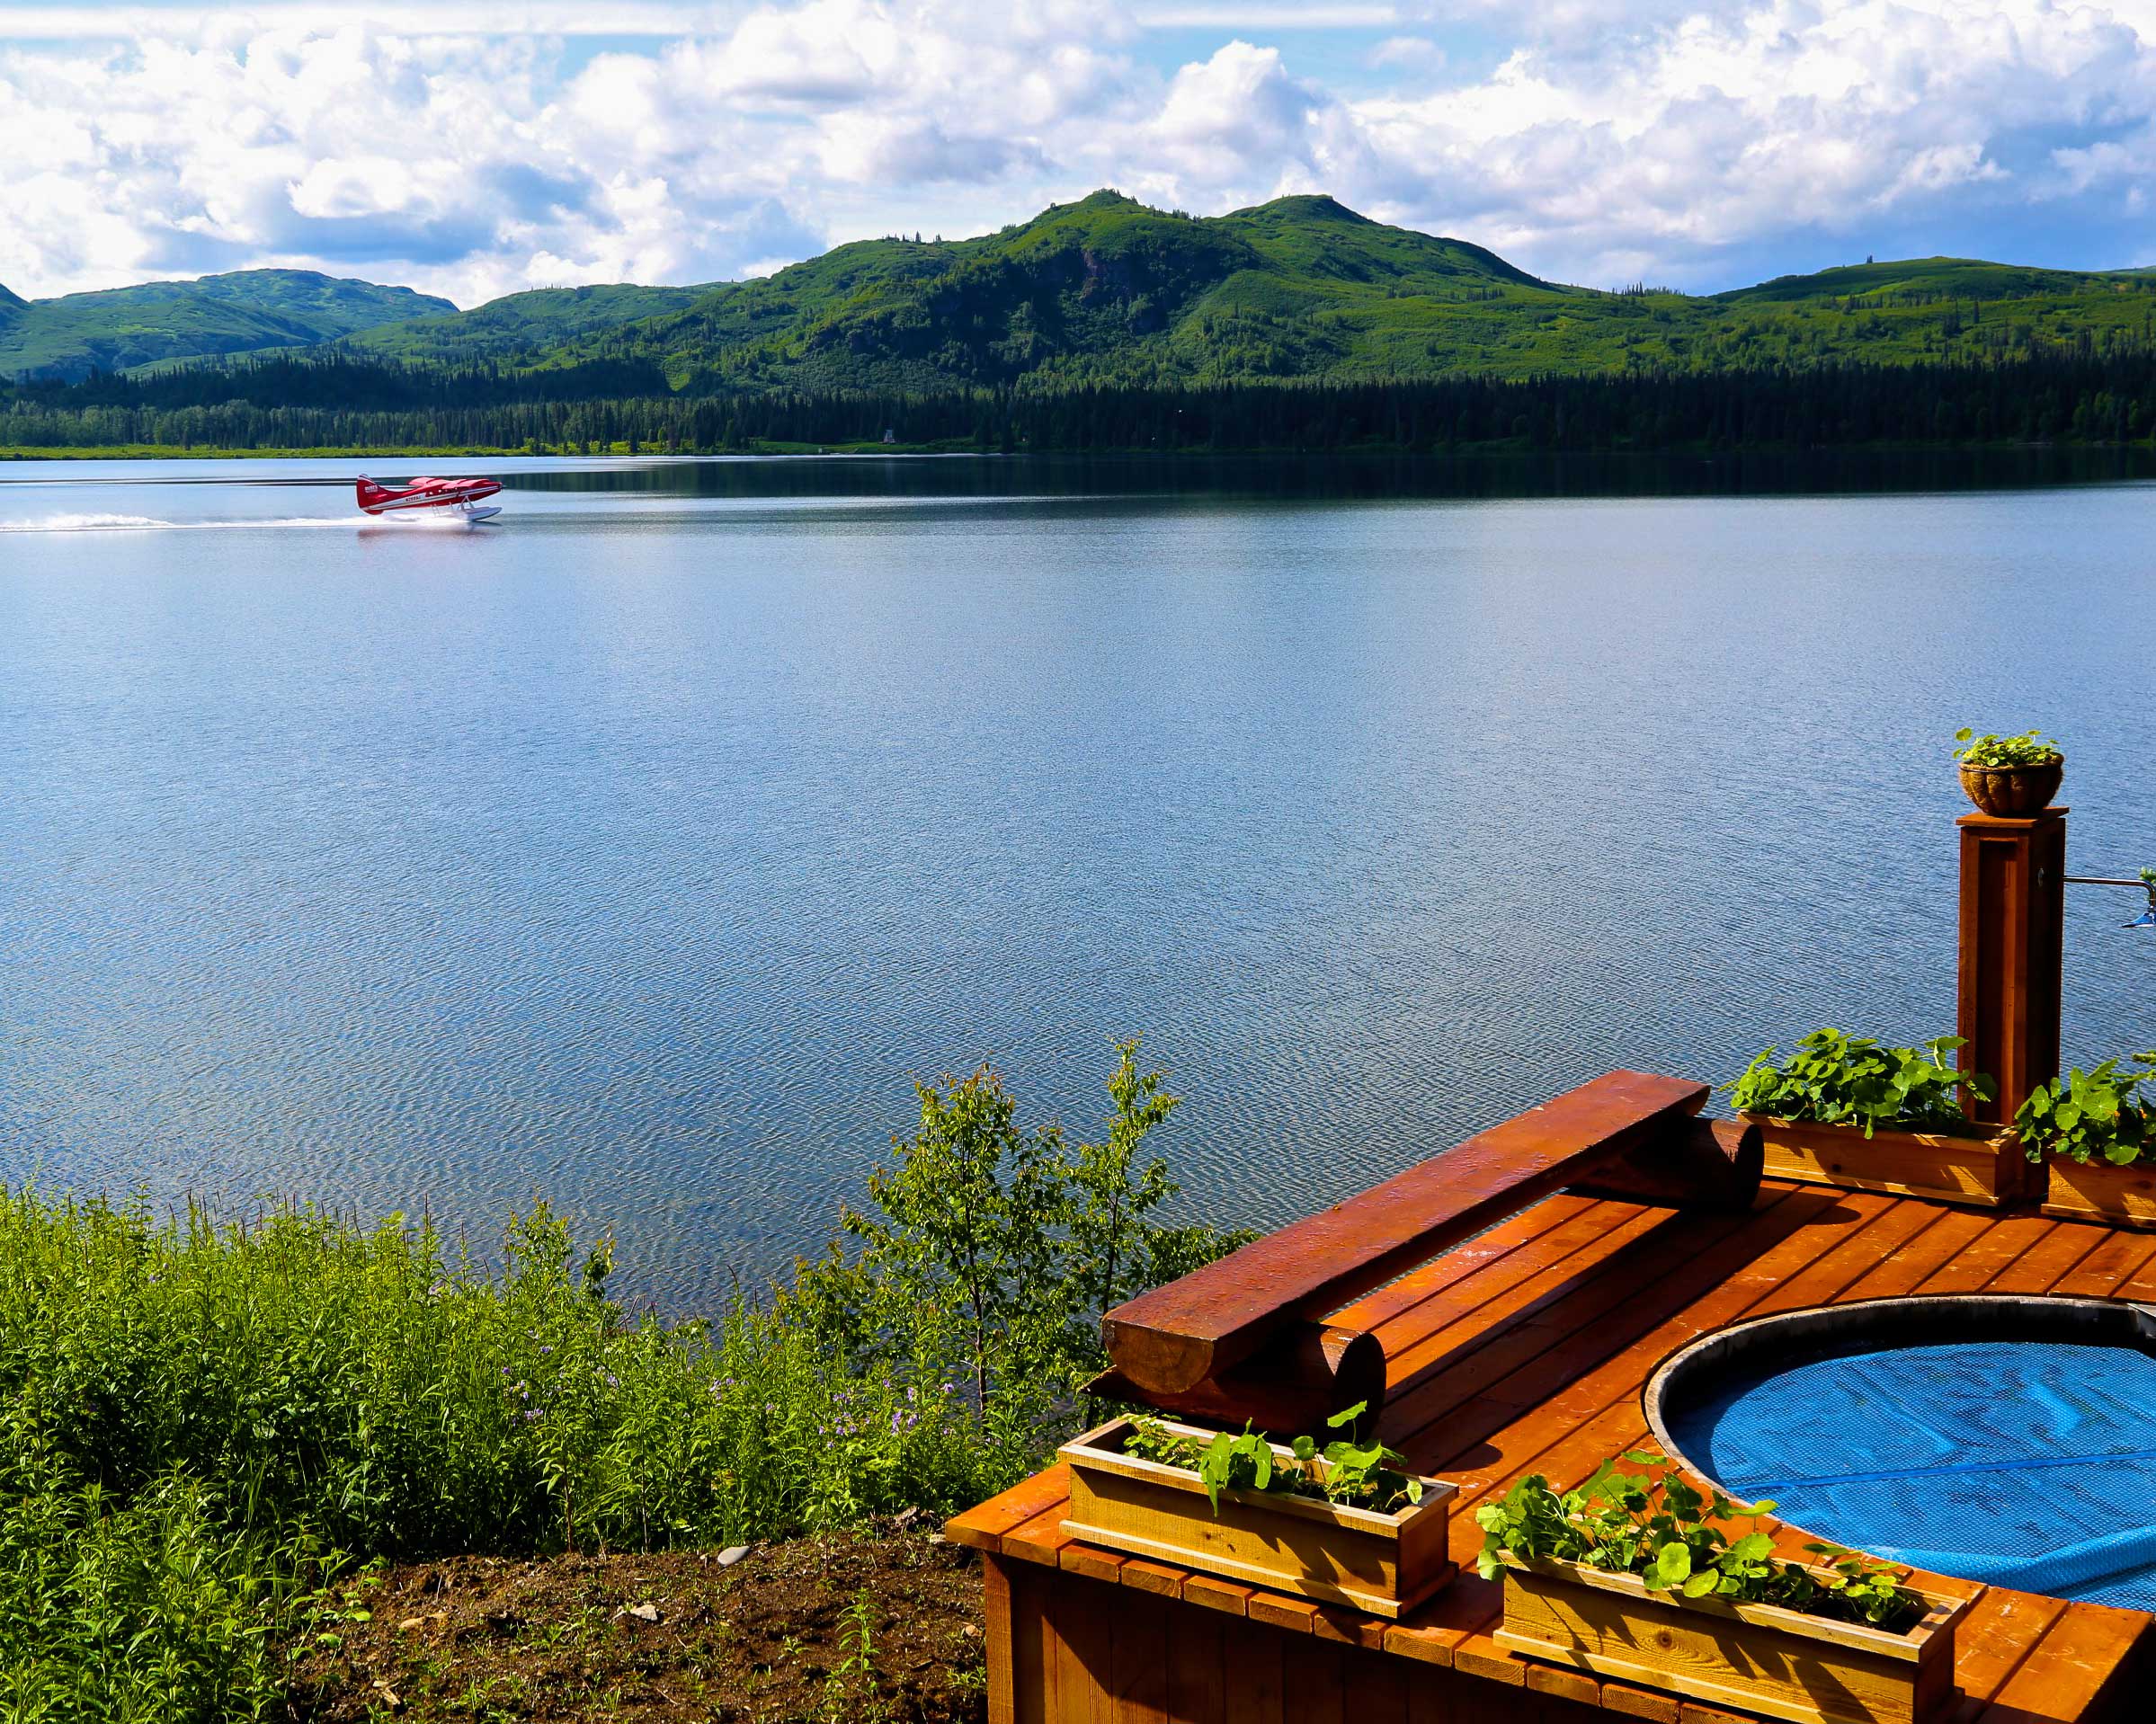 Finest lodges: hot tub in front of a lake with a float plane going by.